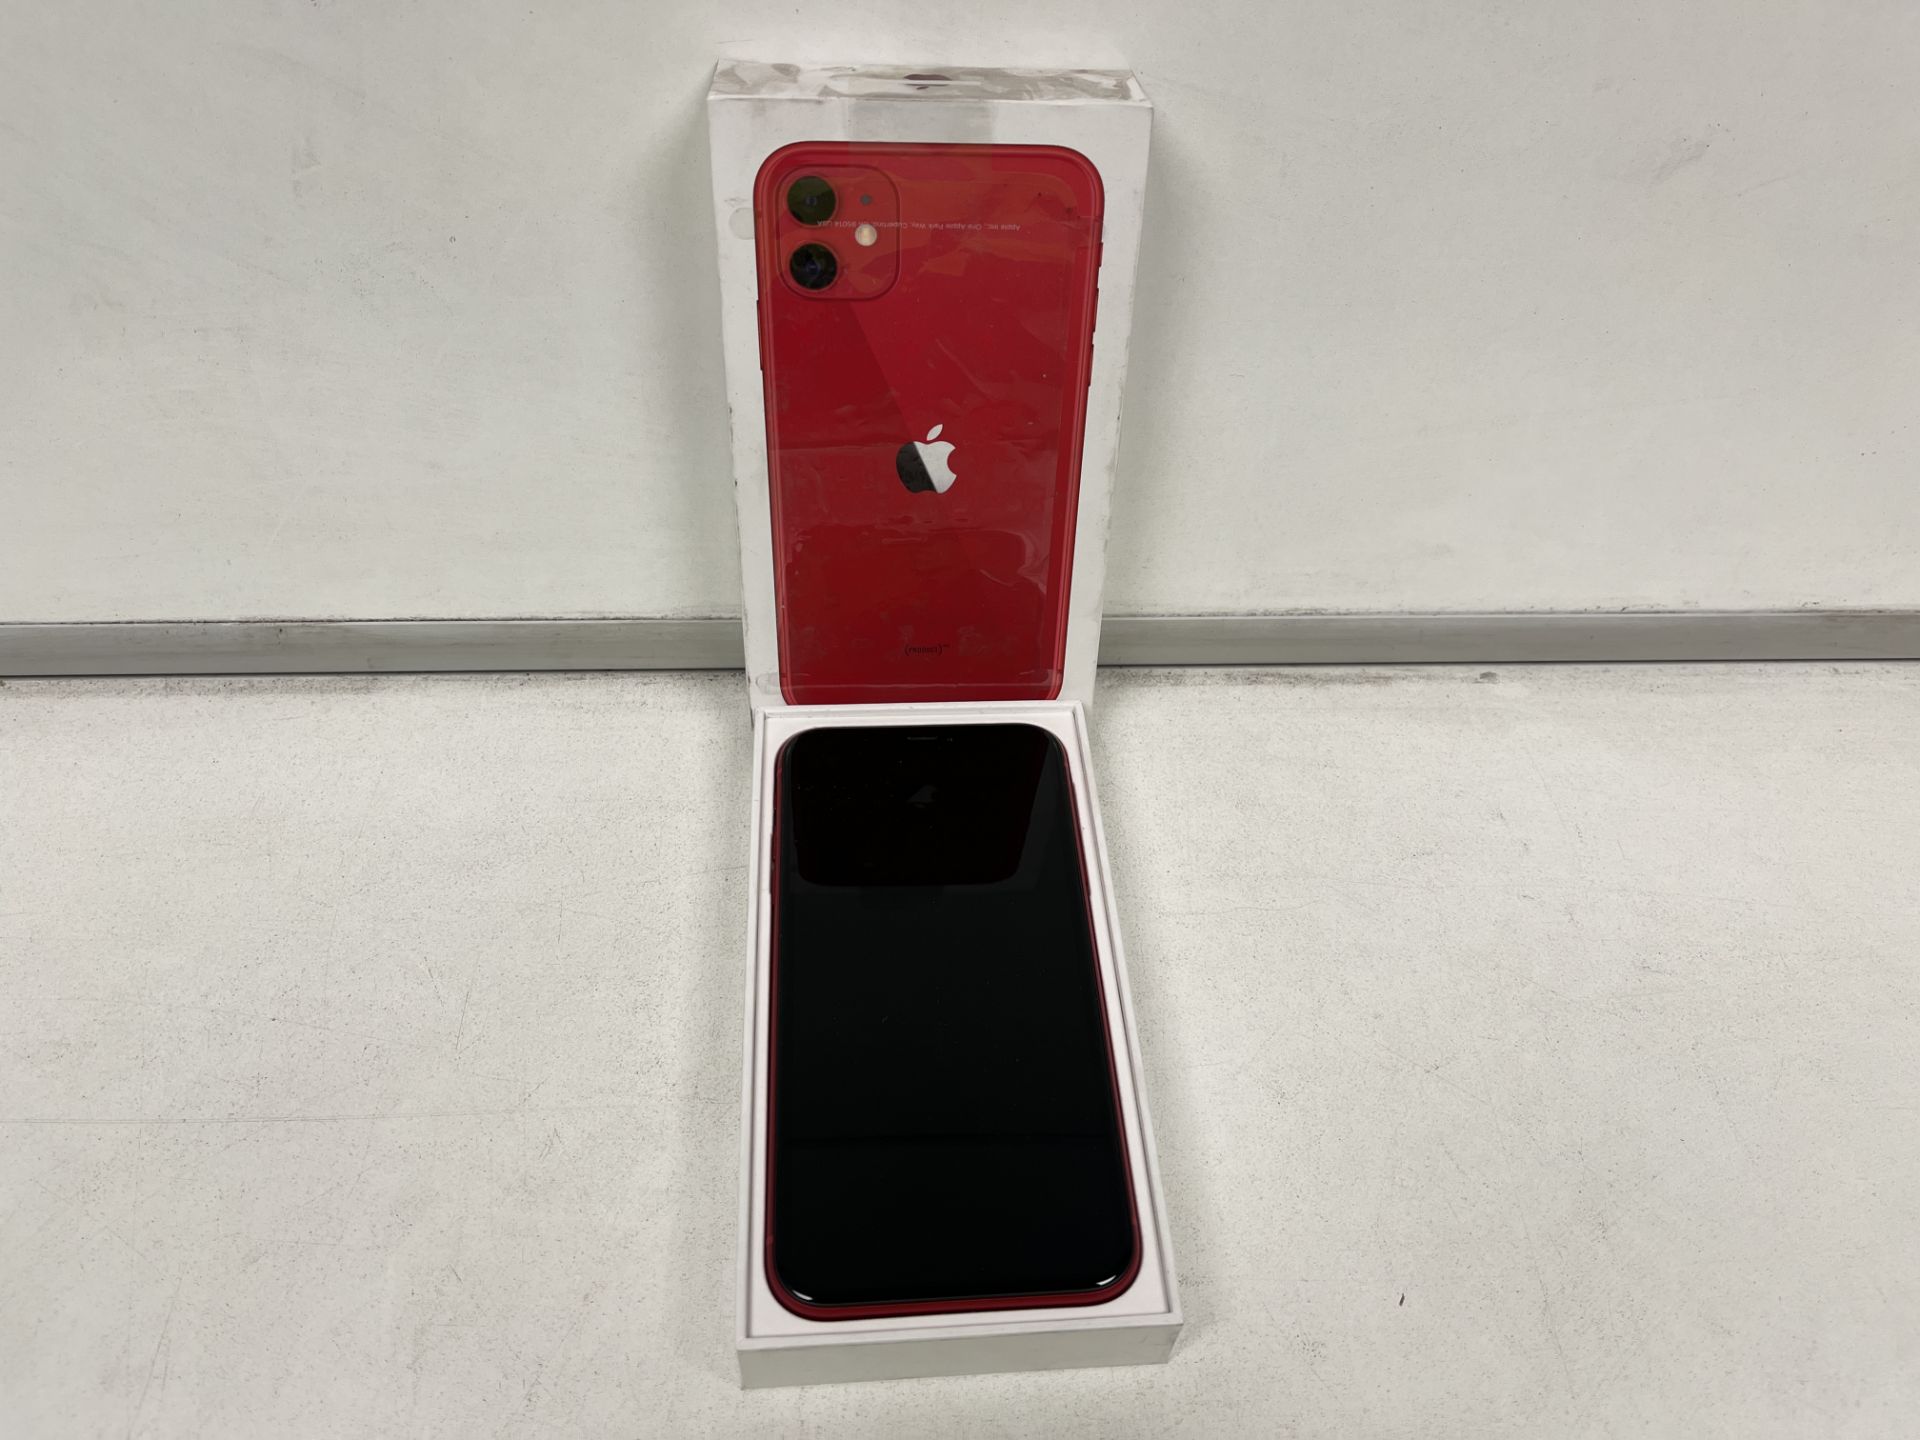 APPLE IPHONE 11 64GB PRODUCT RED (PLEASE NOTE NO CHARGER)